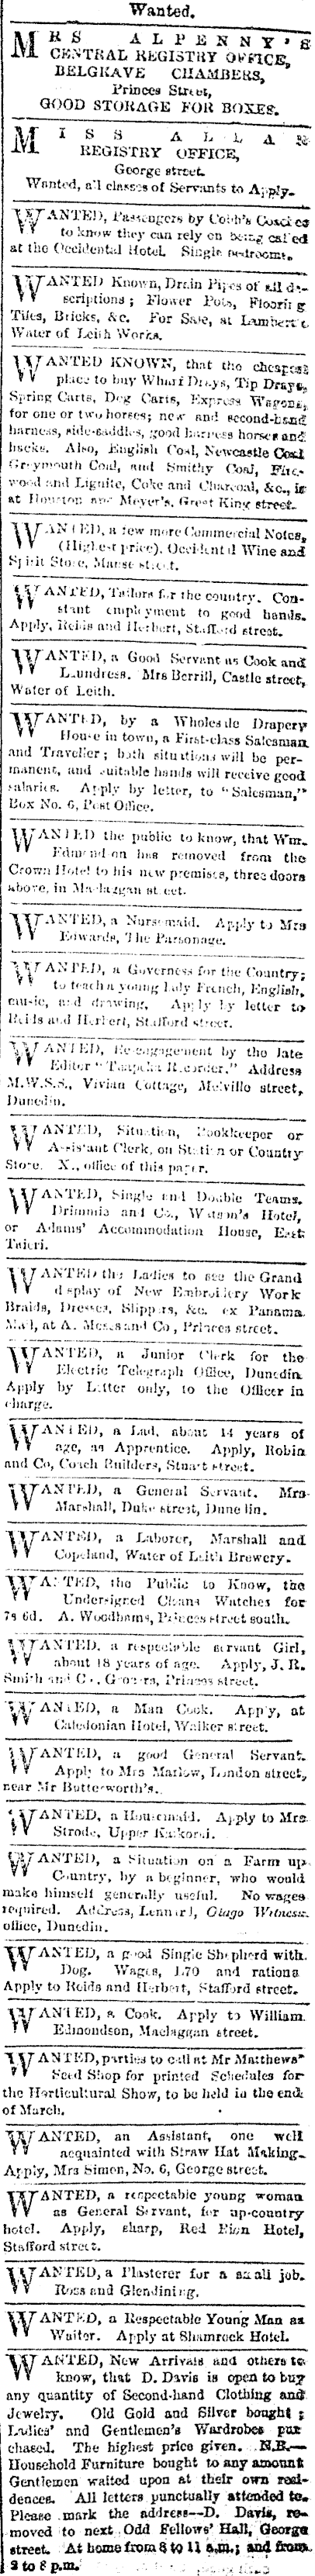 Papers Past Newspapers Otago Daily Times 21 February 1867 Page 6 Advertisements Column 7